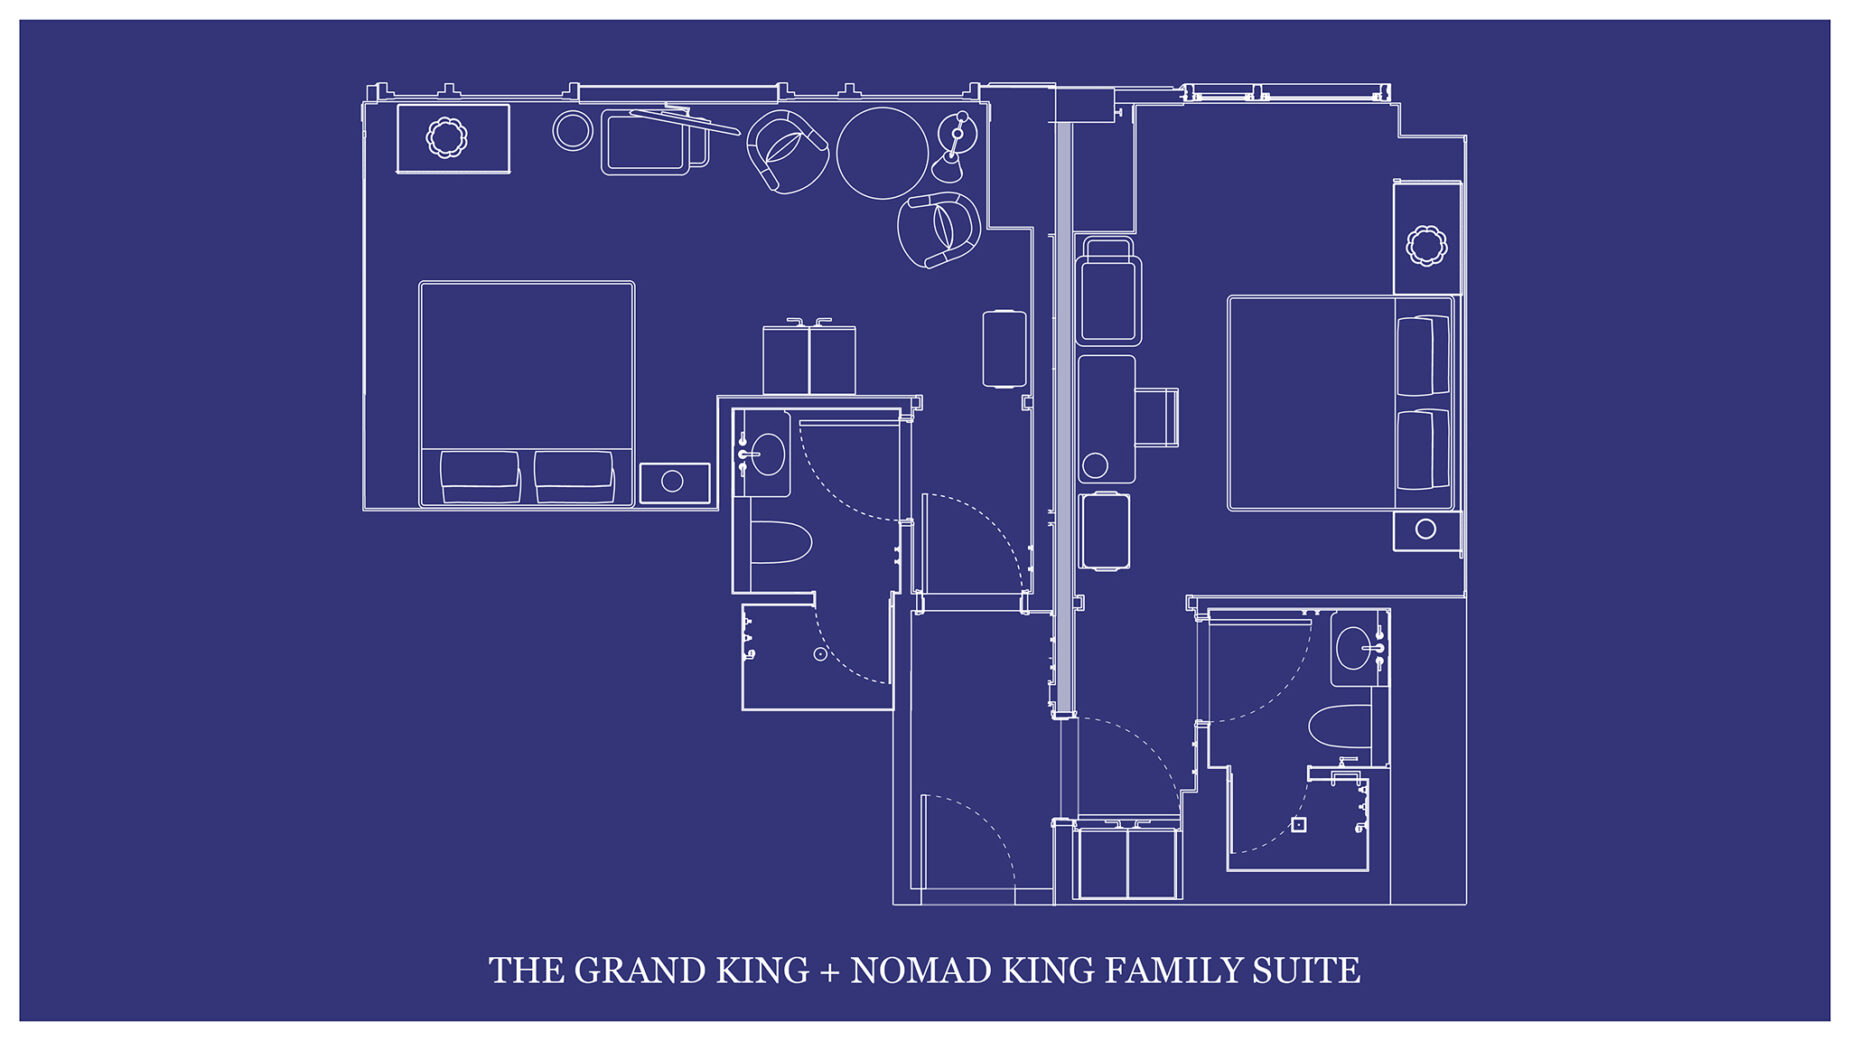 The architectural layout of "THE GRAND KING + NOMAD KING FAMILY SUITE" is depicted on a blueprint map.